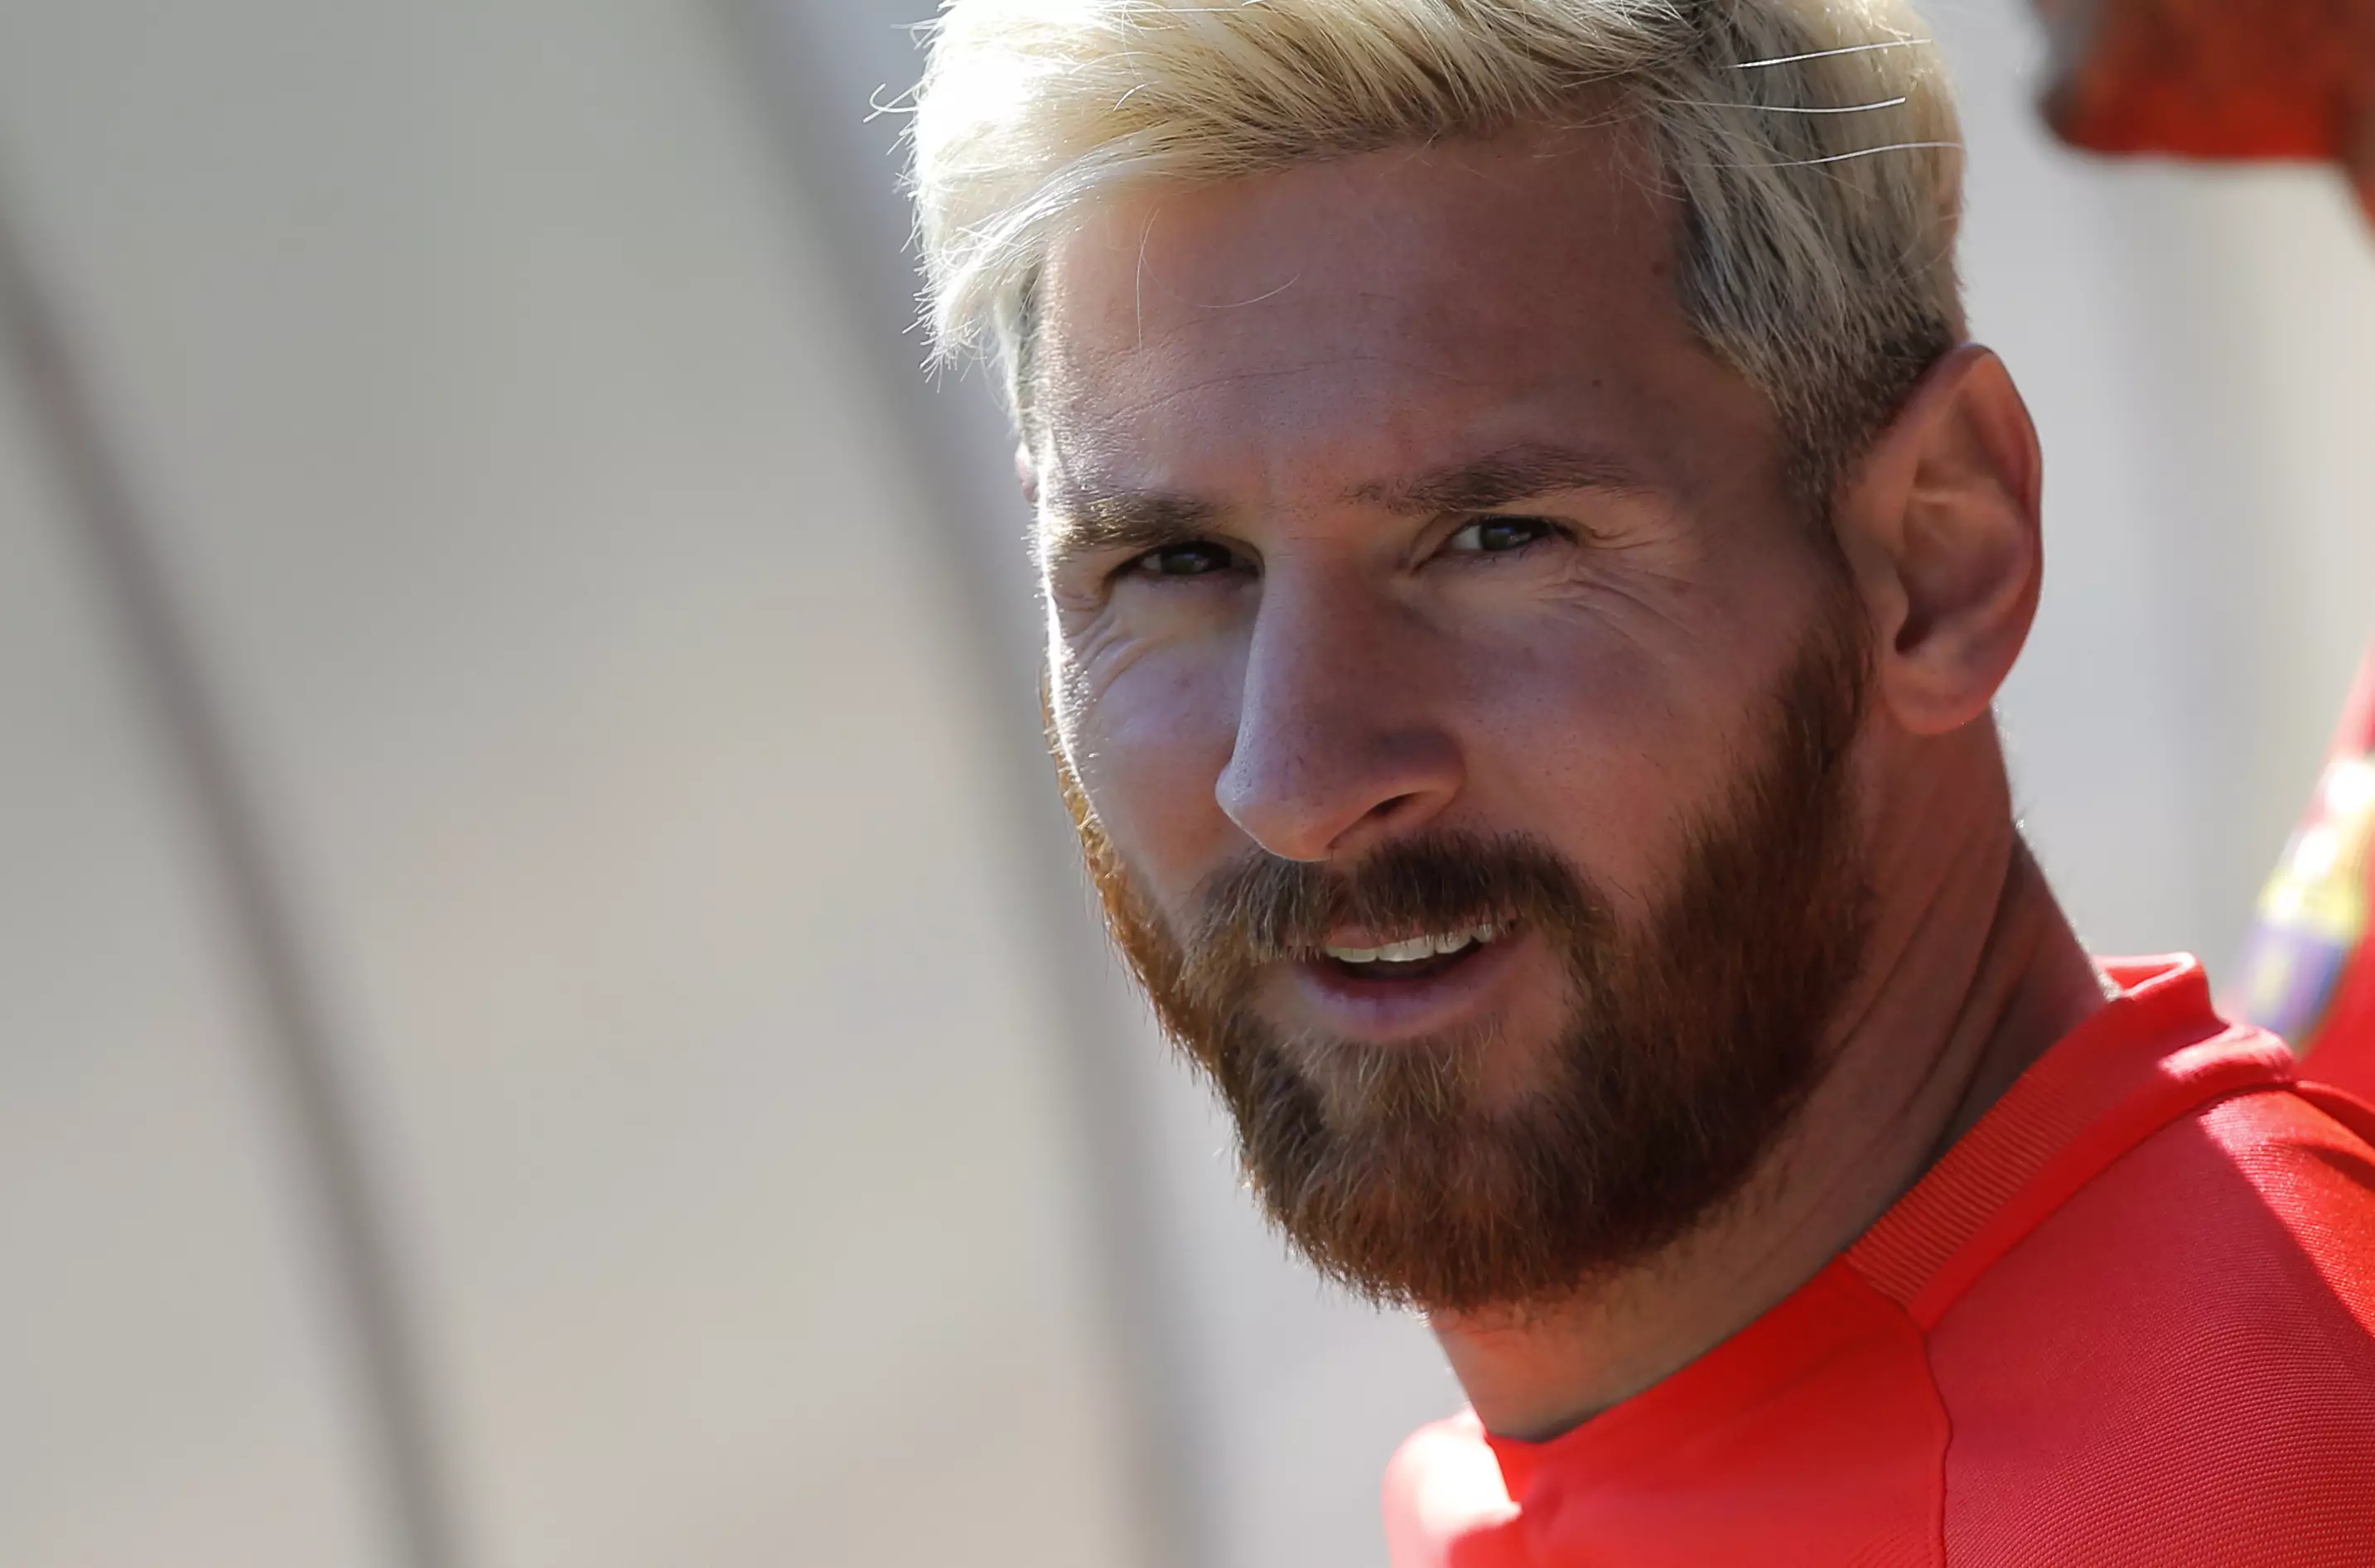 Lionel Messi Explains Why He Decided To Dye His Hair